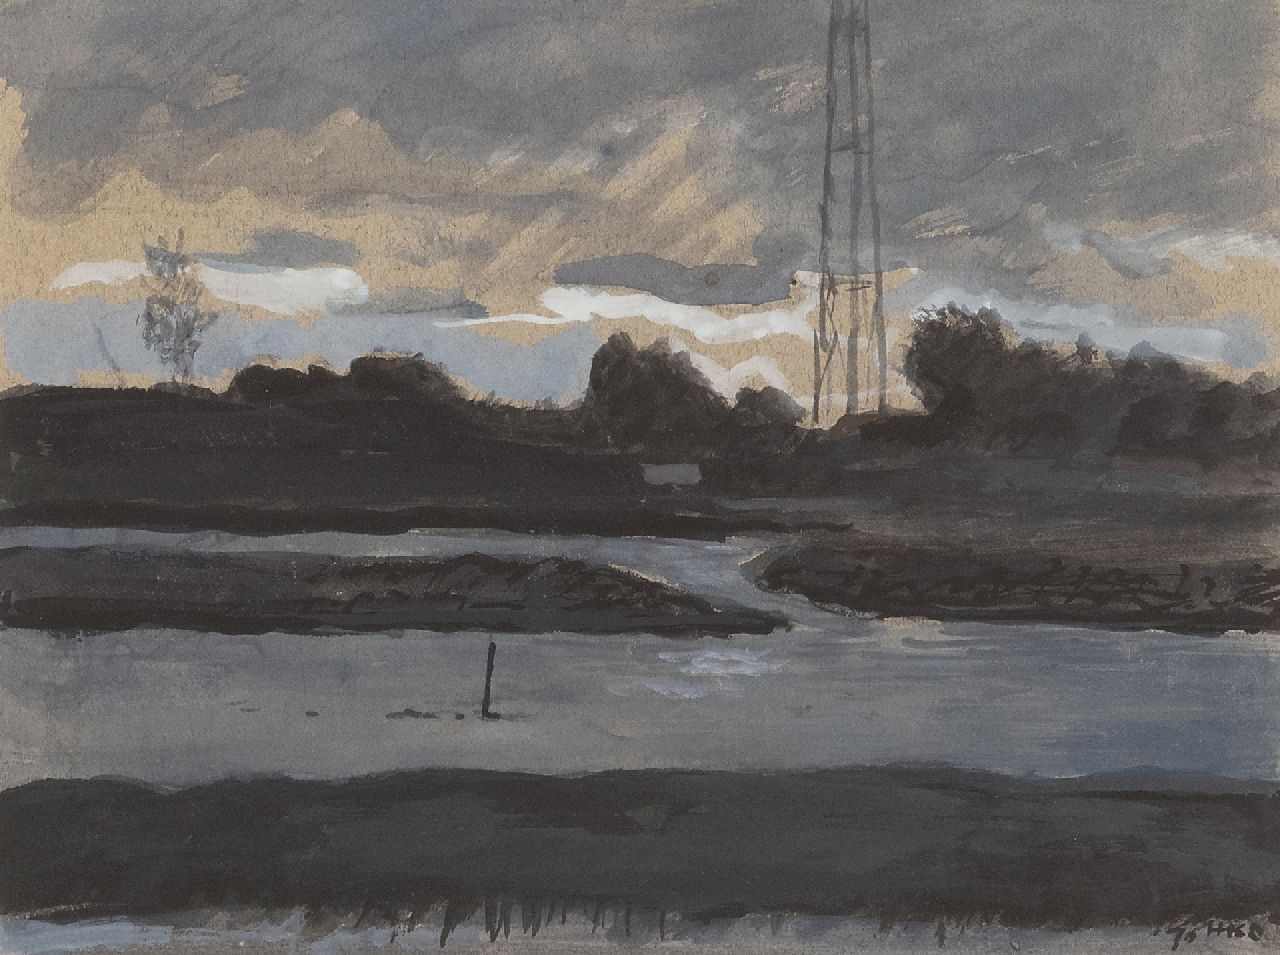 Kamerlingh Onnes H.H.  | 'Harm' Henrick Kamerlingh Onnes | Watercolours and drawings offered for sale | A river landscape, gouache on paper 22.0 x 29.0 cm, signed l.r. with monogram and dated '70